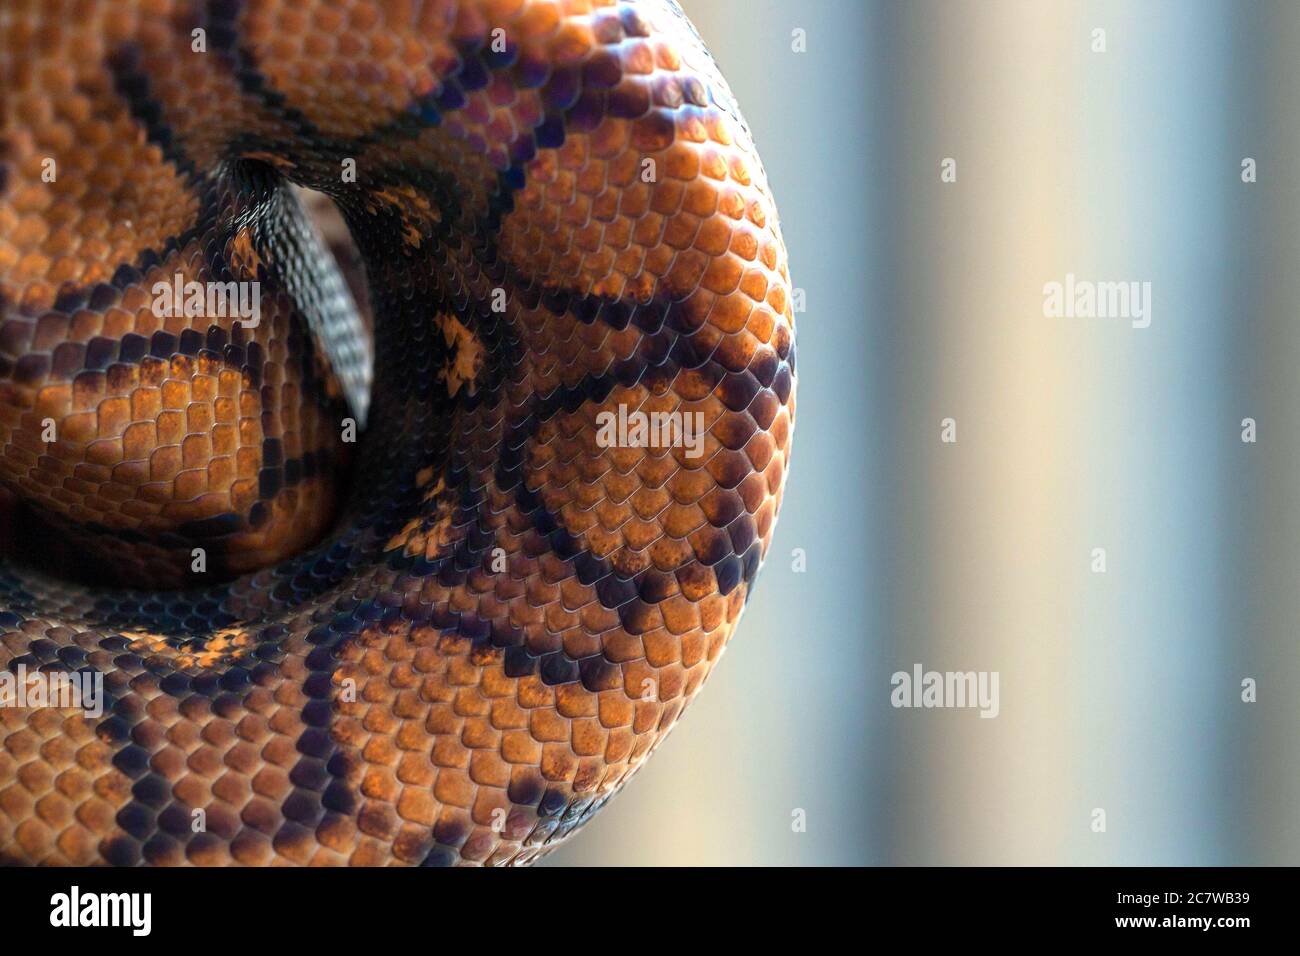 https://c8.alamy.com/comp/2C7WB39/python-curled-up-in-a-ball-on-blurred-background-snake-texture-background-macro-2C7WB39.jpg